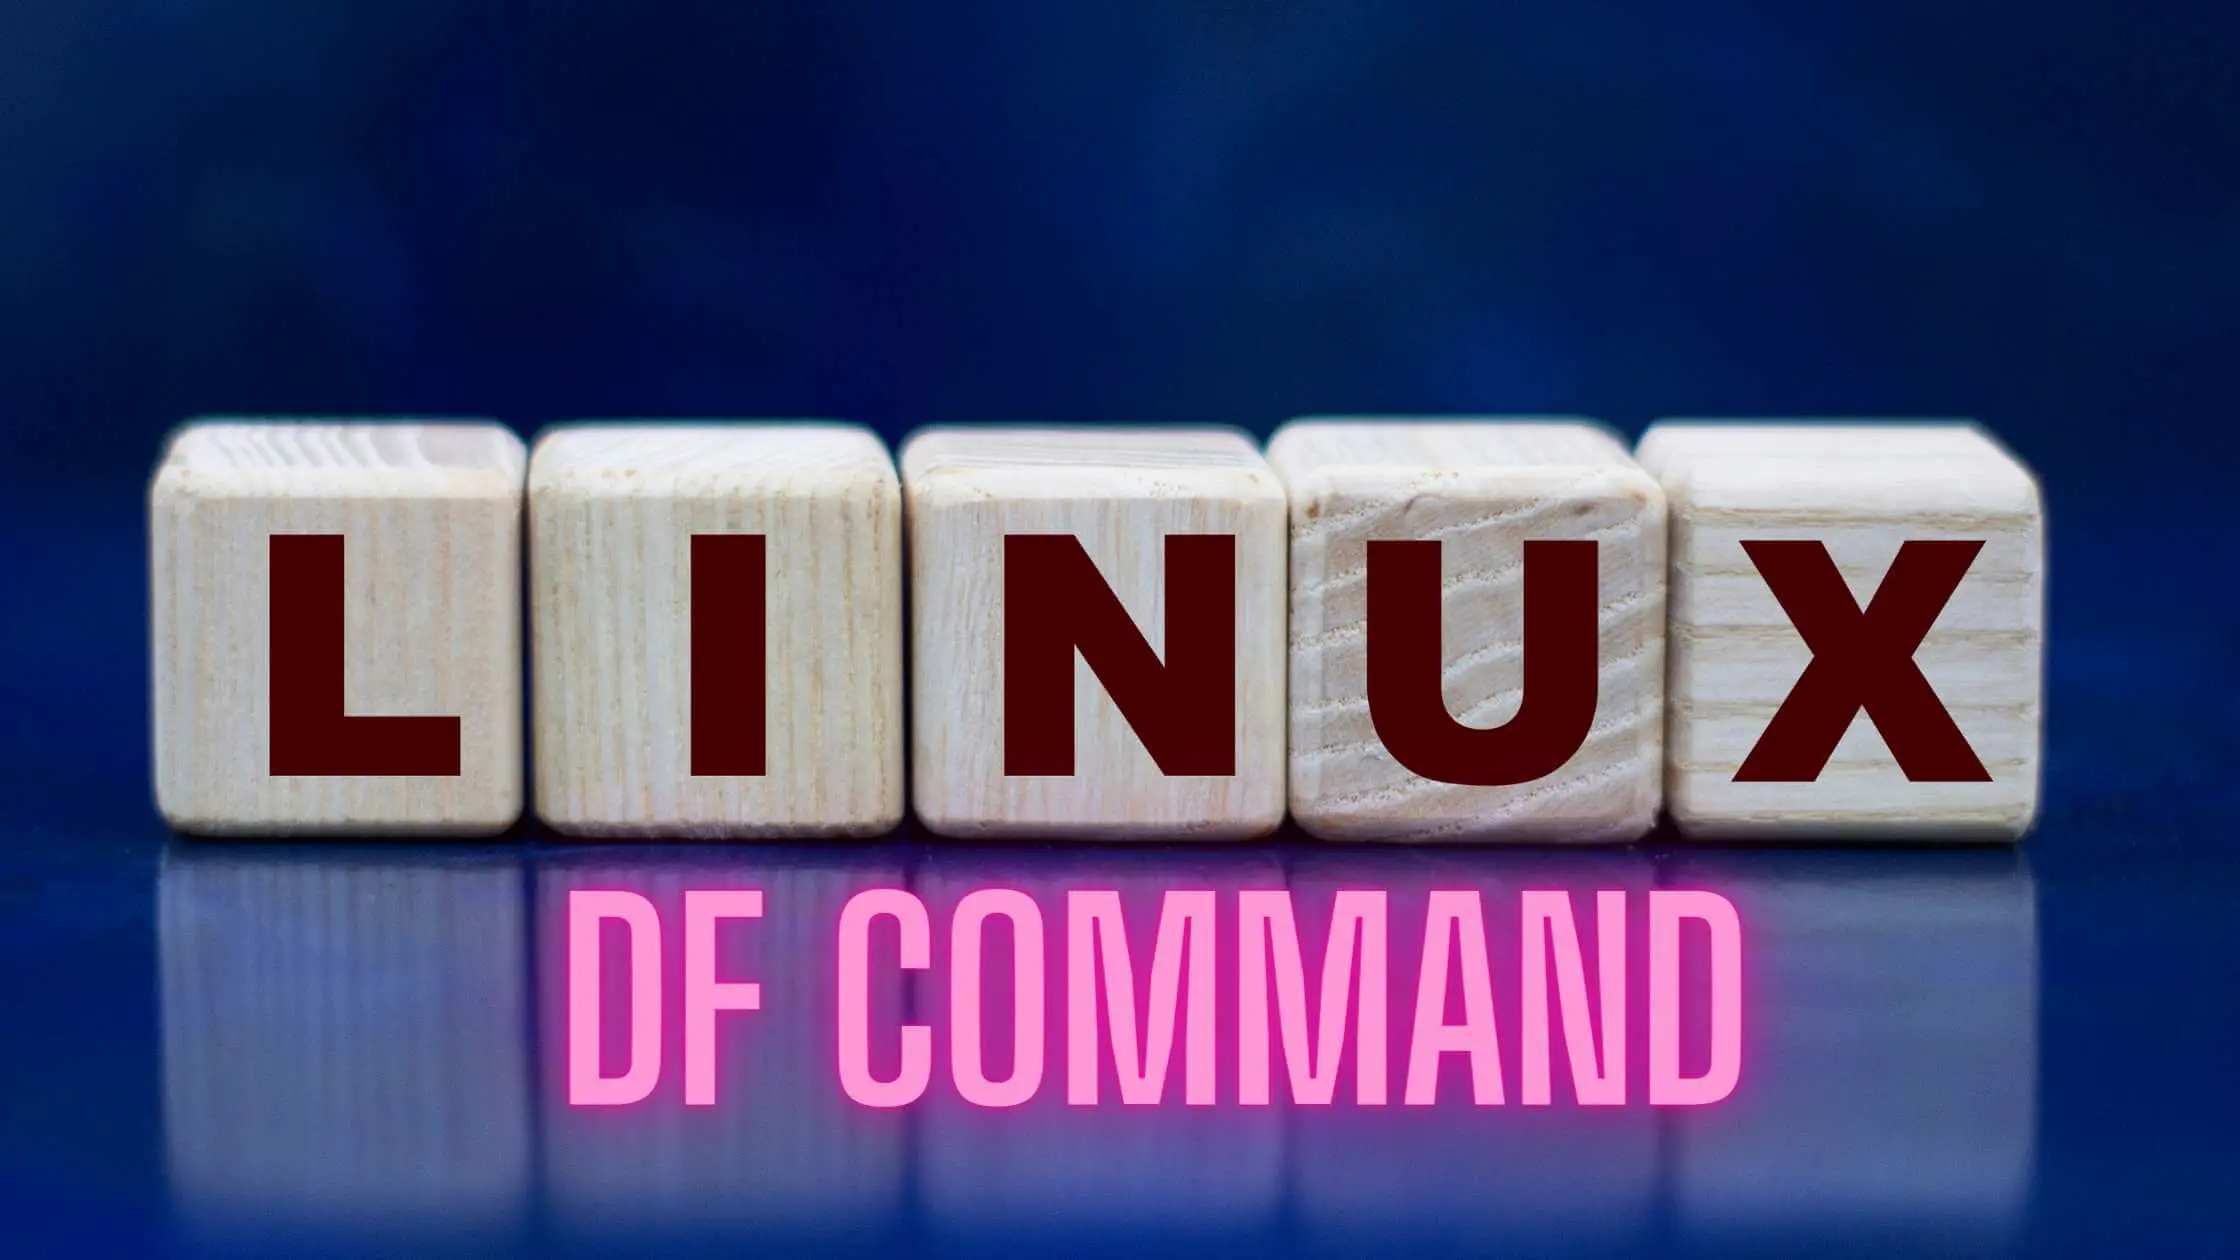 25 Linux df Command To Check Disk Space (1)